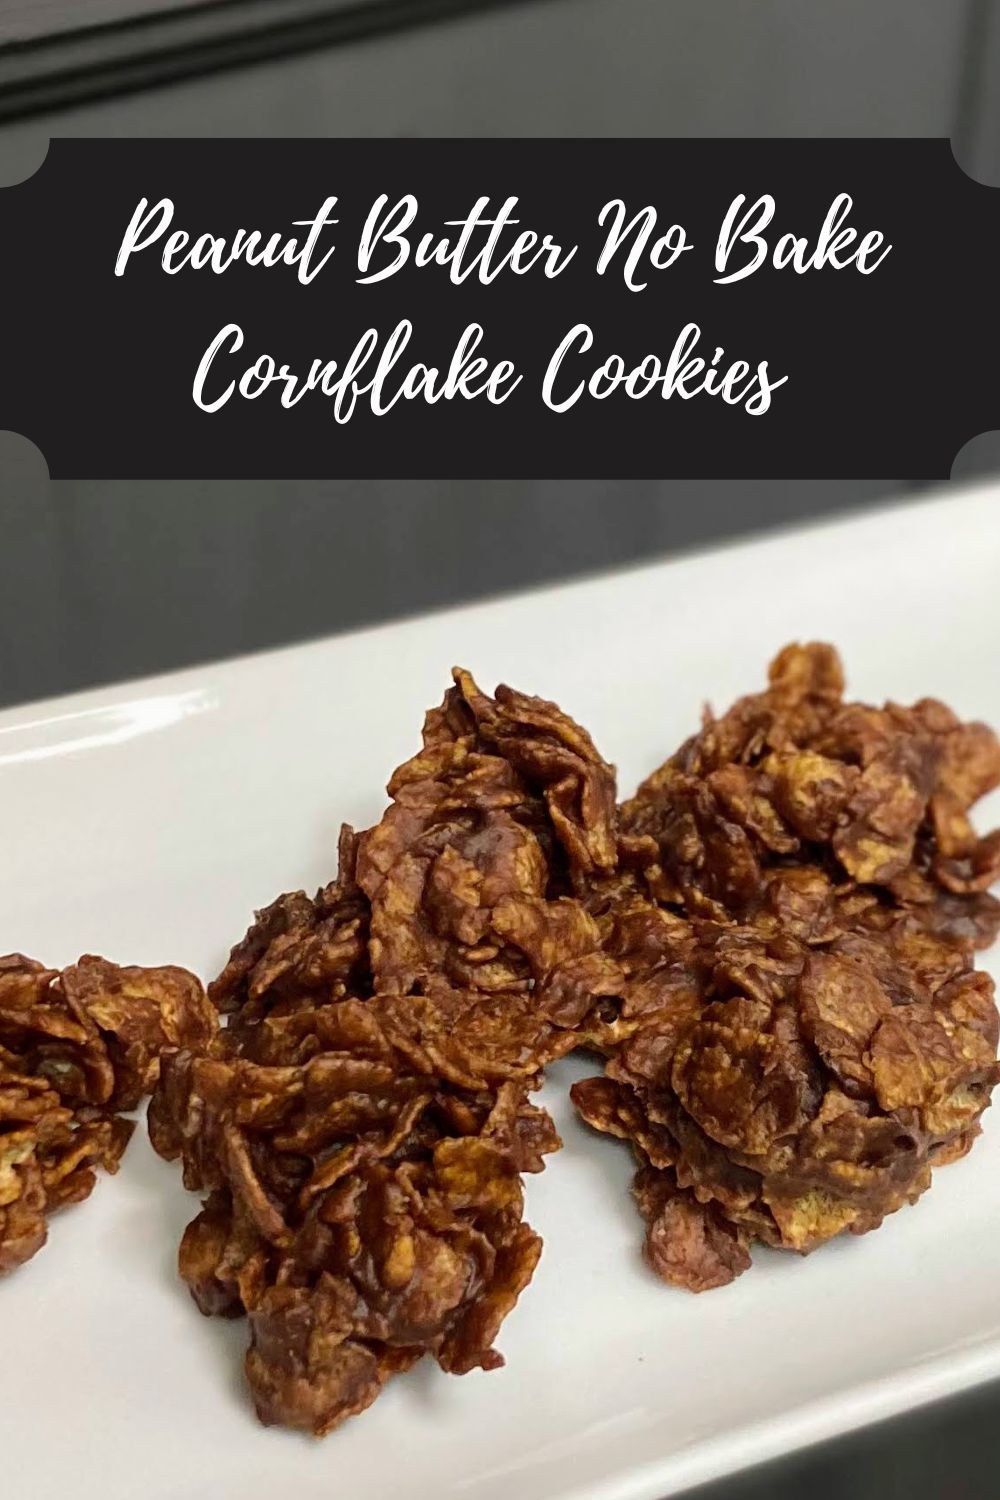 Peanut Butter Cornflake Cookies : The Ultimate No-Bake Delight!